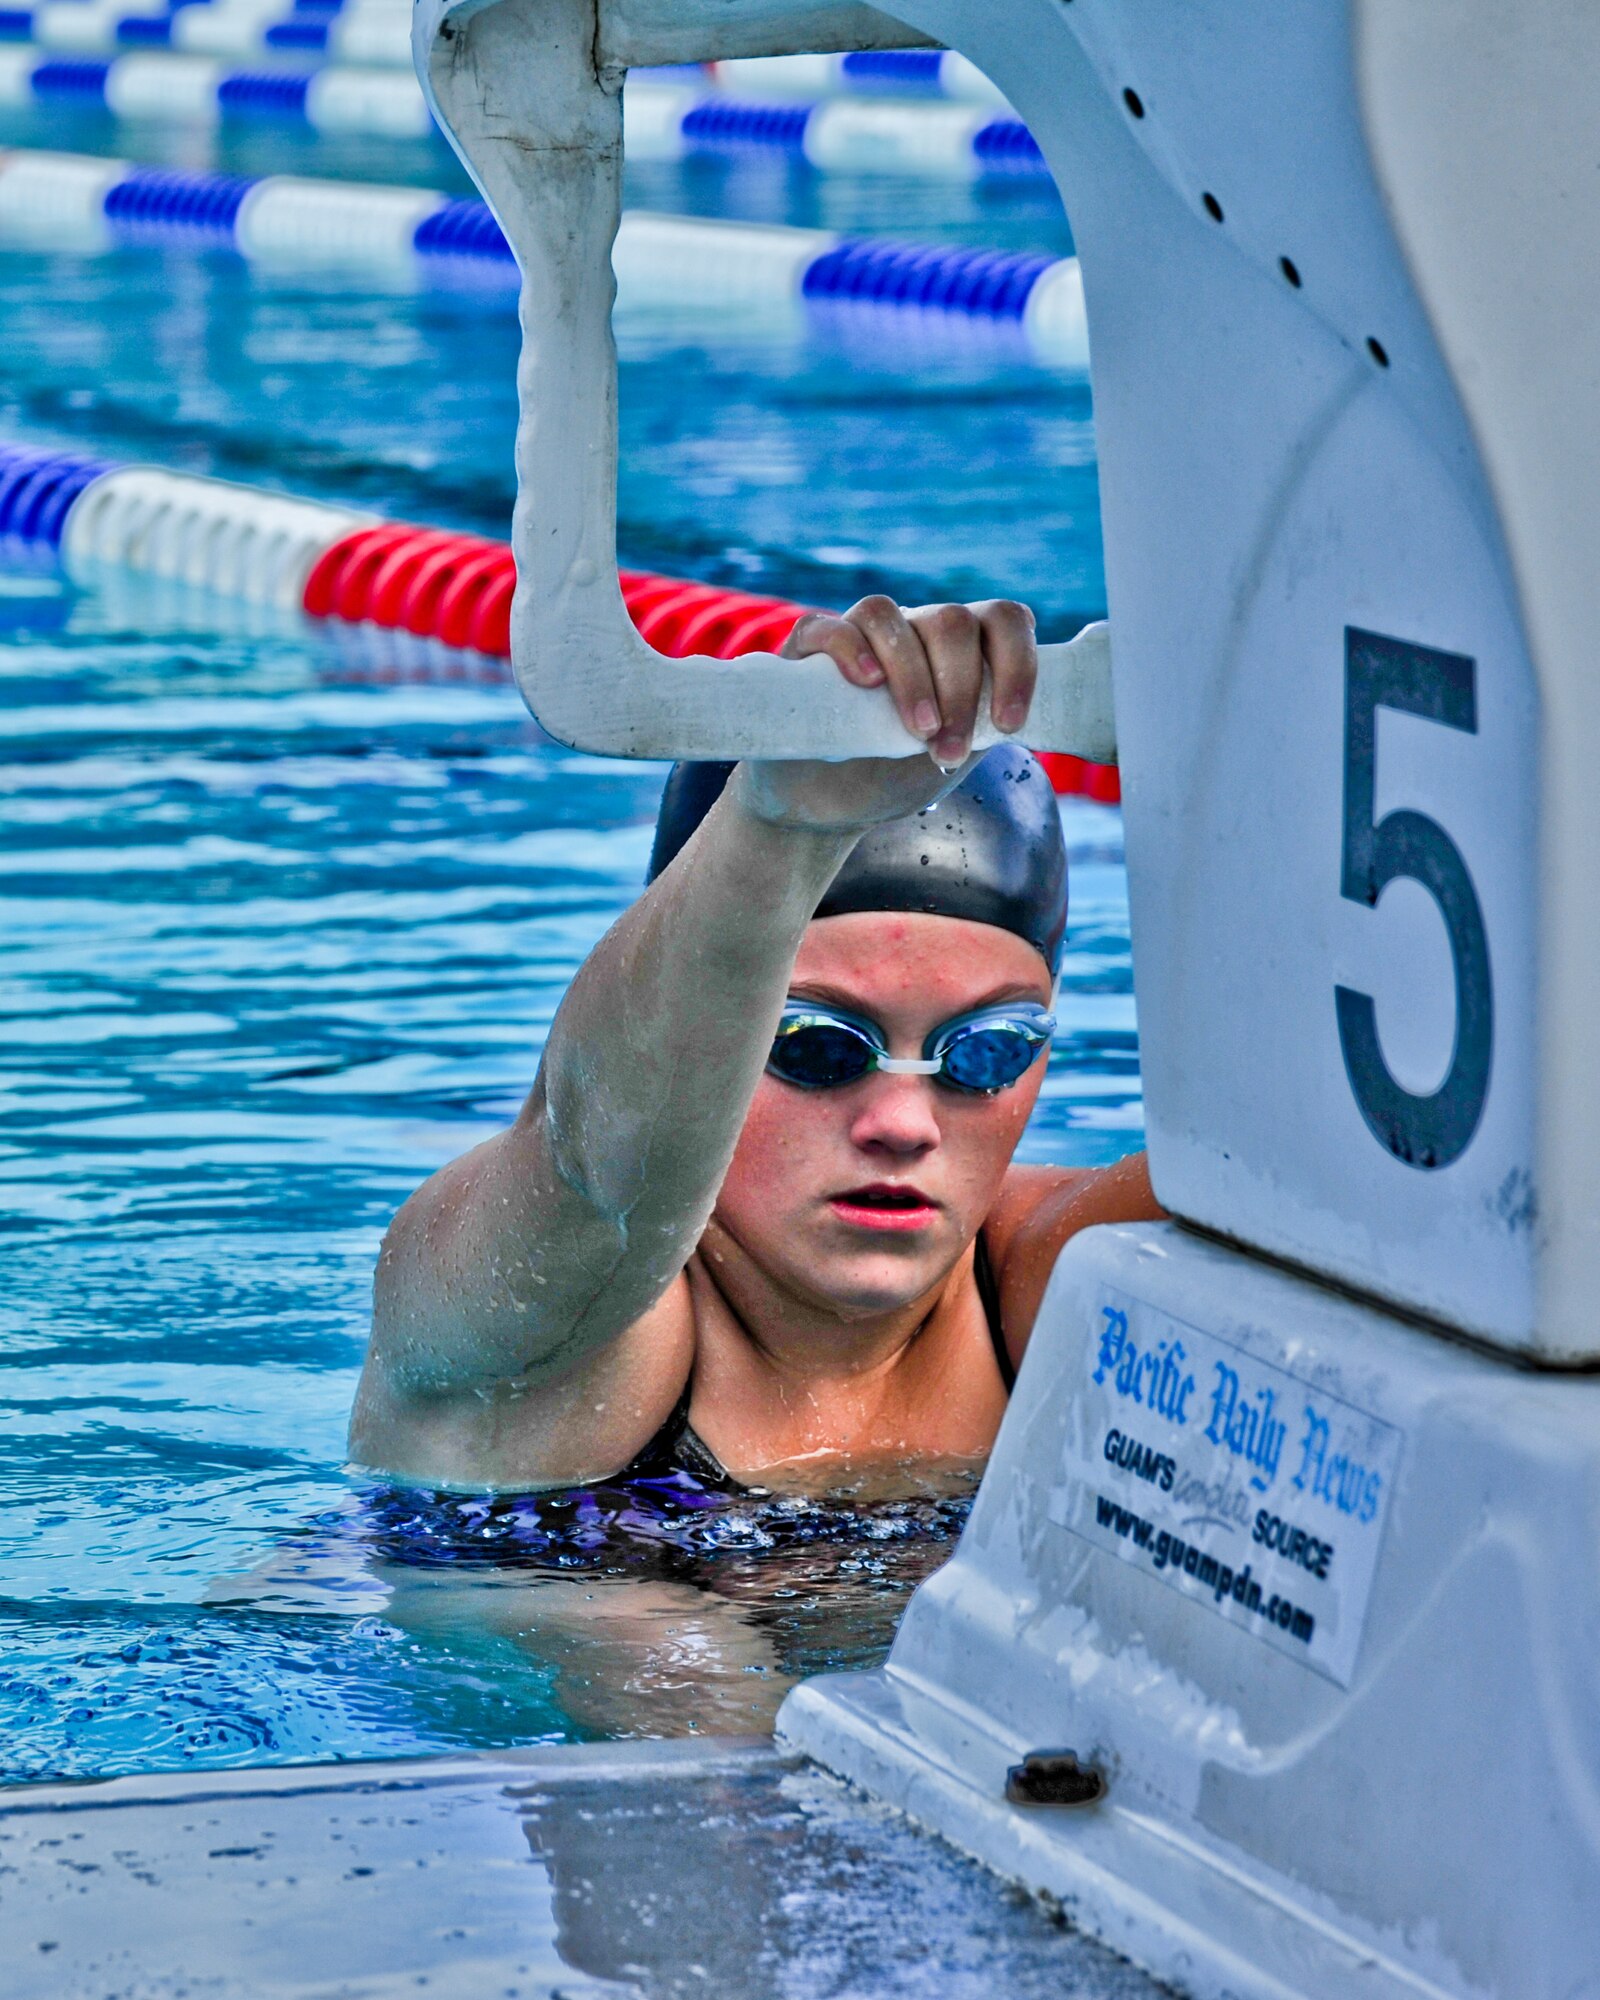 Andersen Marlin's Swim Team members, made up of Team Andersen youth from ages 6 to 18 years old, compete in a tournament Dec. 16.  (U.S. Air Force photo/Staff Sgt. Alexandre Montes)